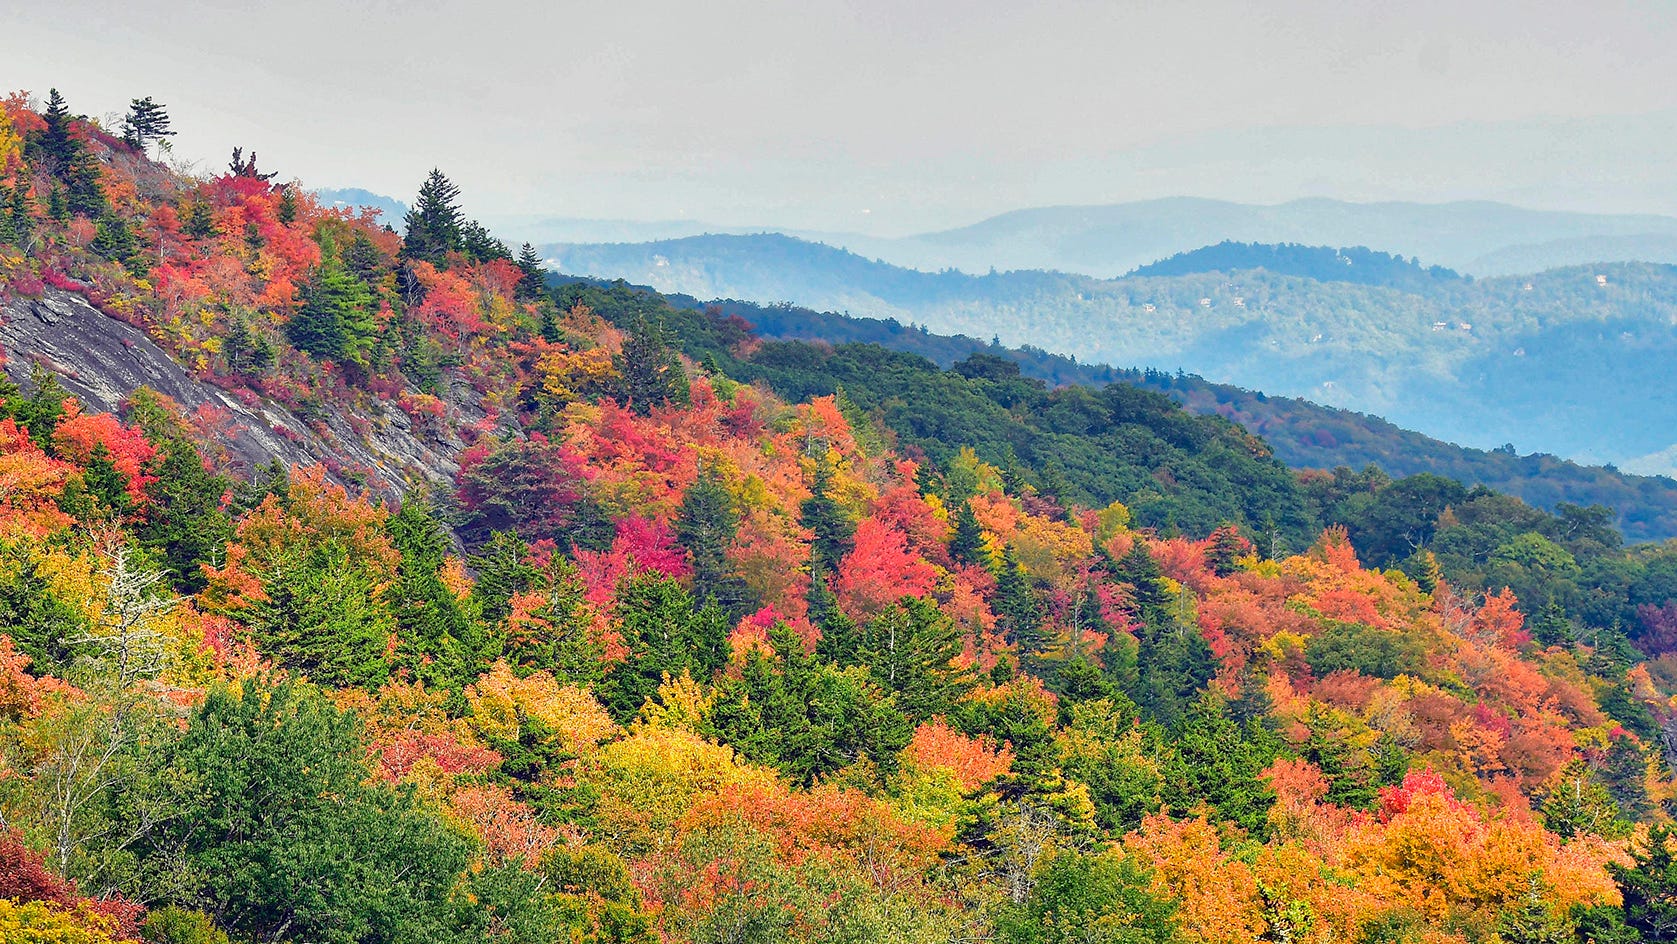 Here's what to expect from Asheville NC's fall foliage in 2021